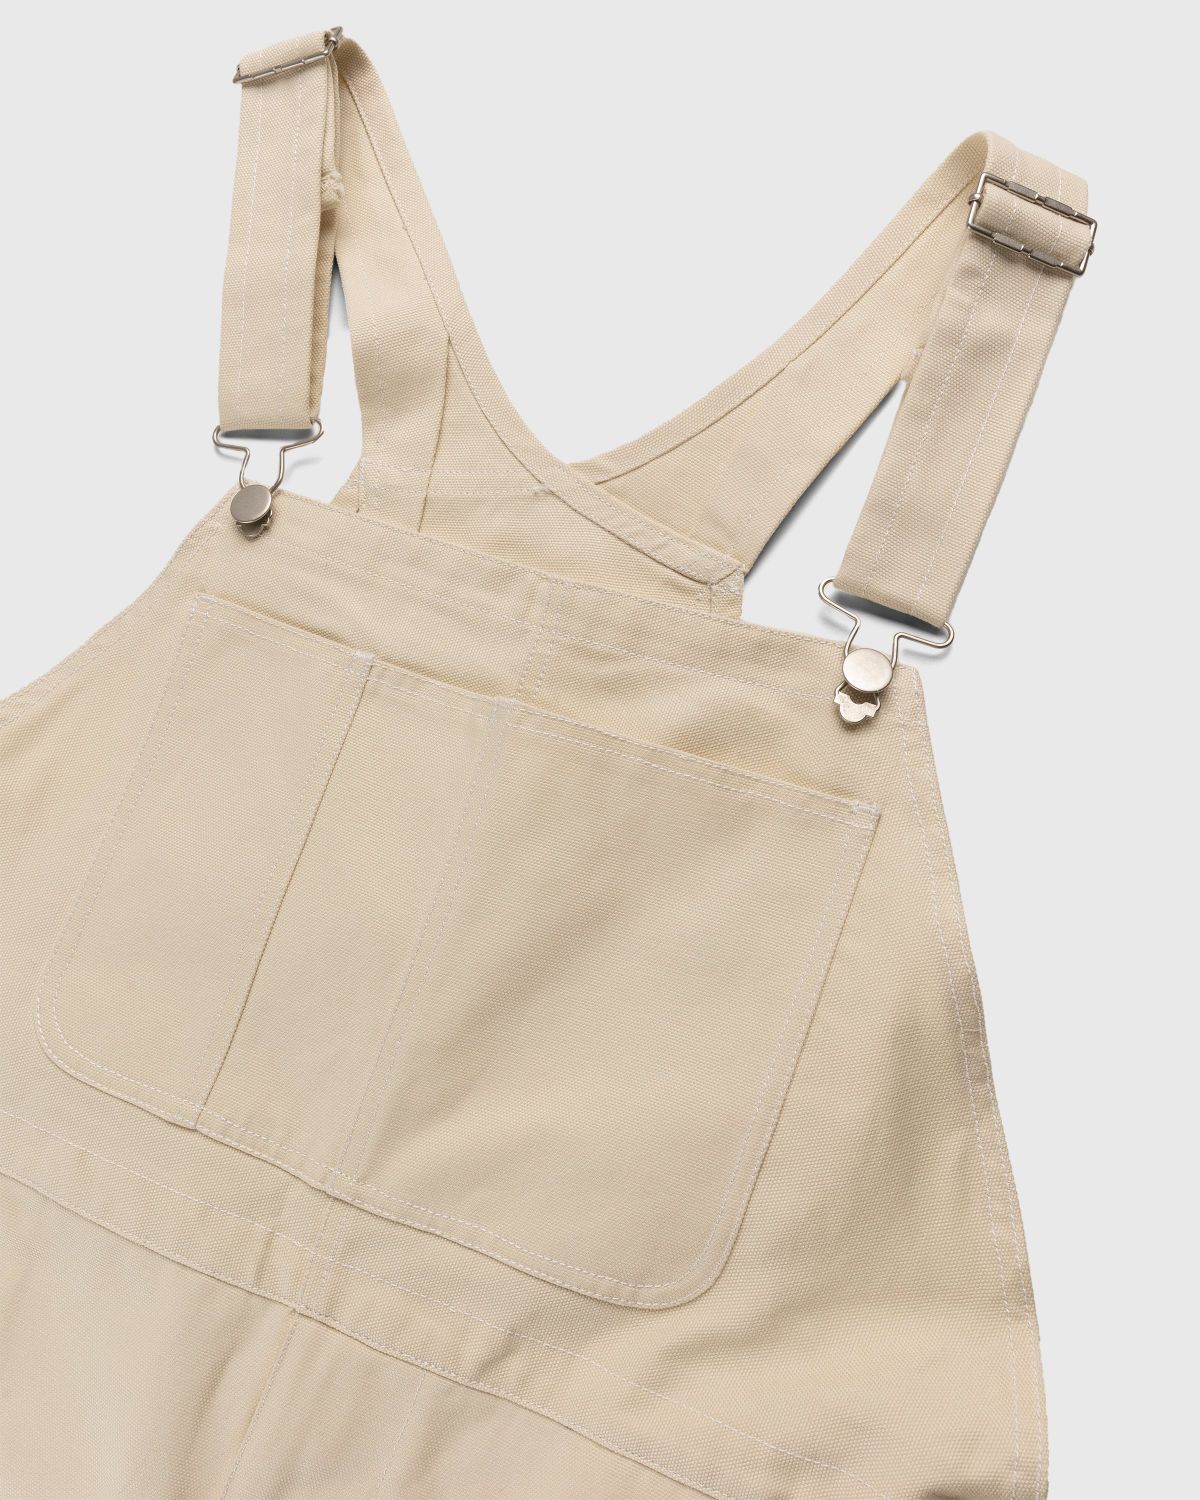 RUF x Highsnobiety – Cotton Overalls Natural - Trousers - Beige - Image 5